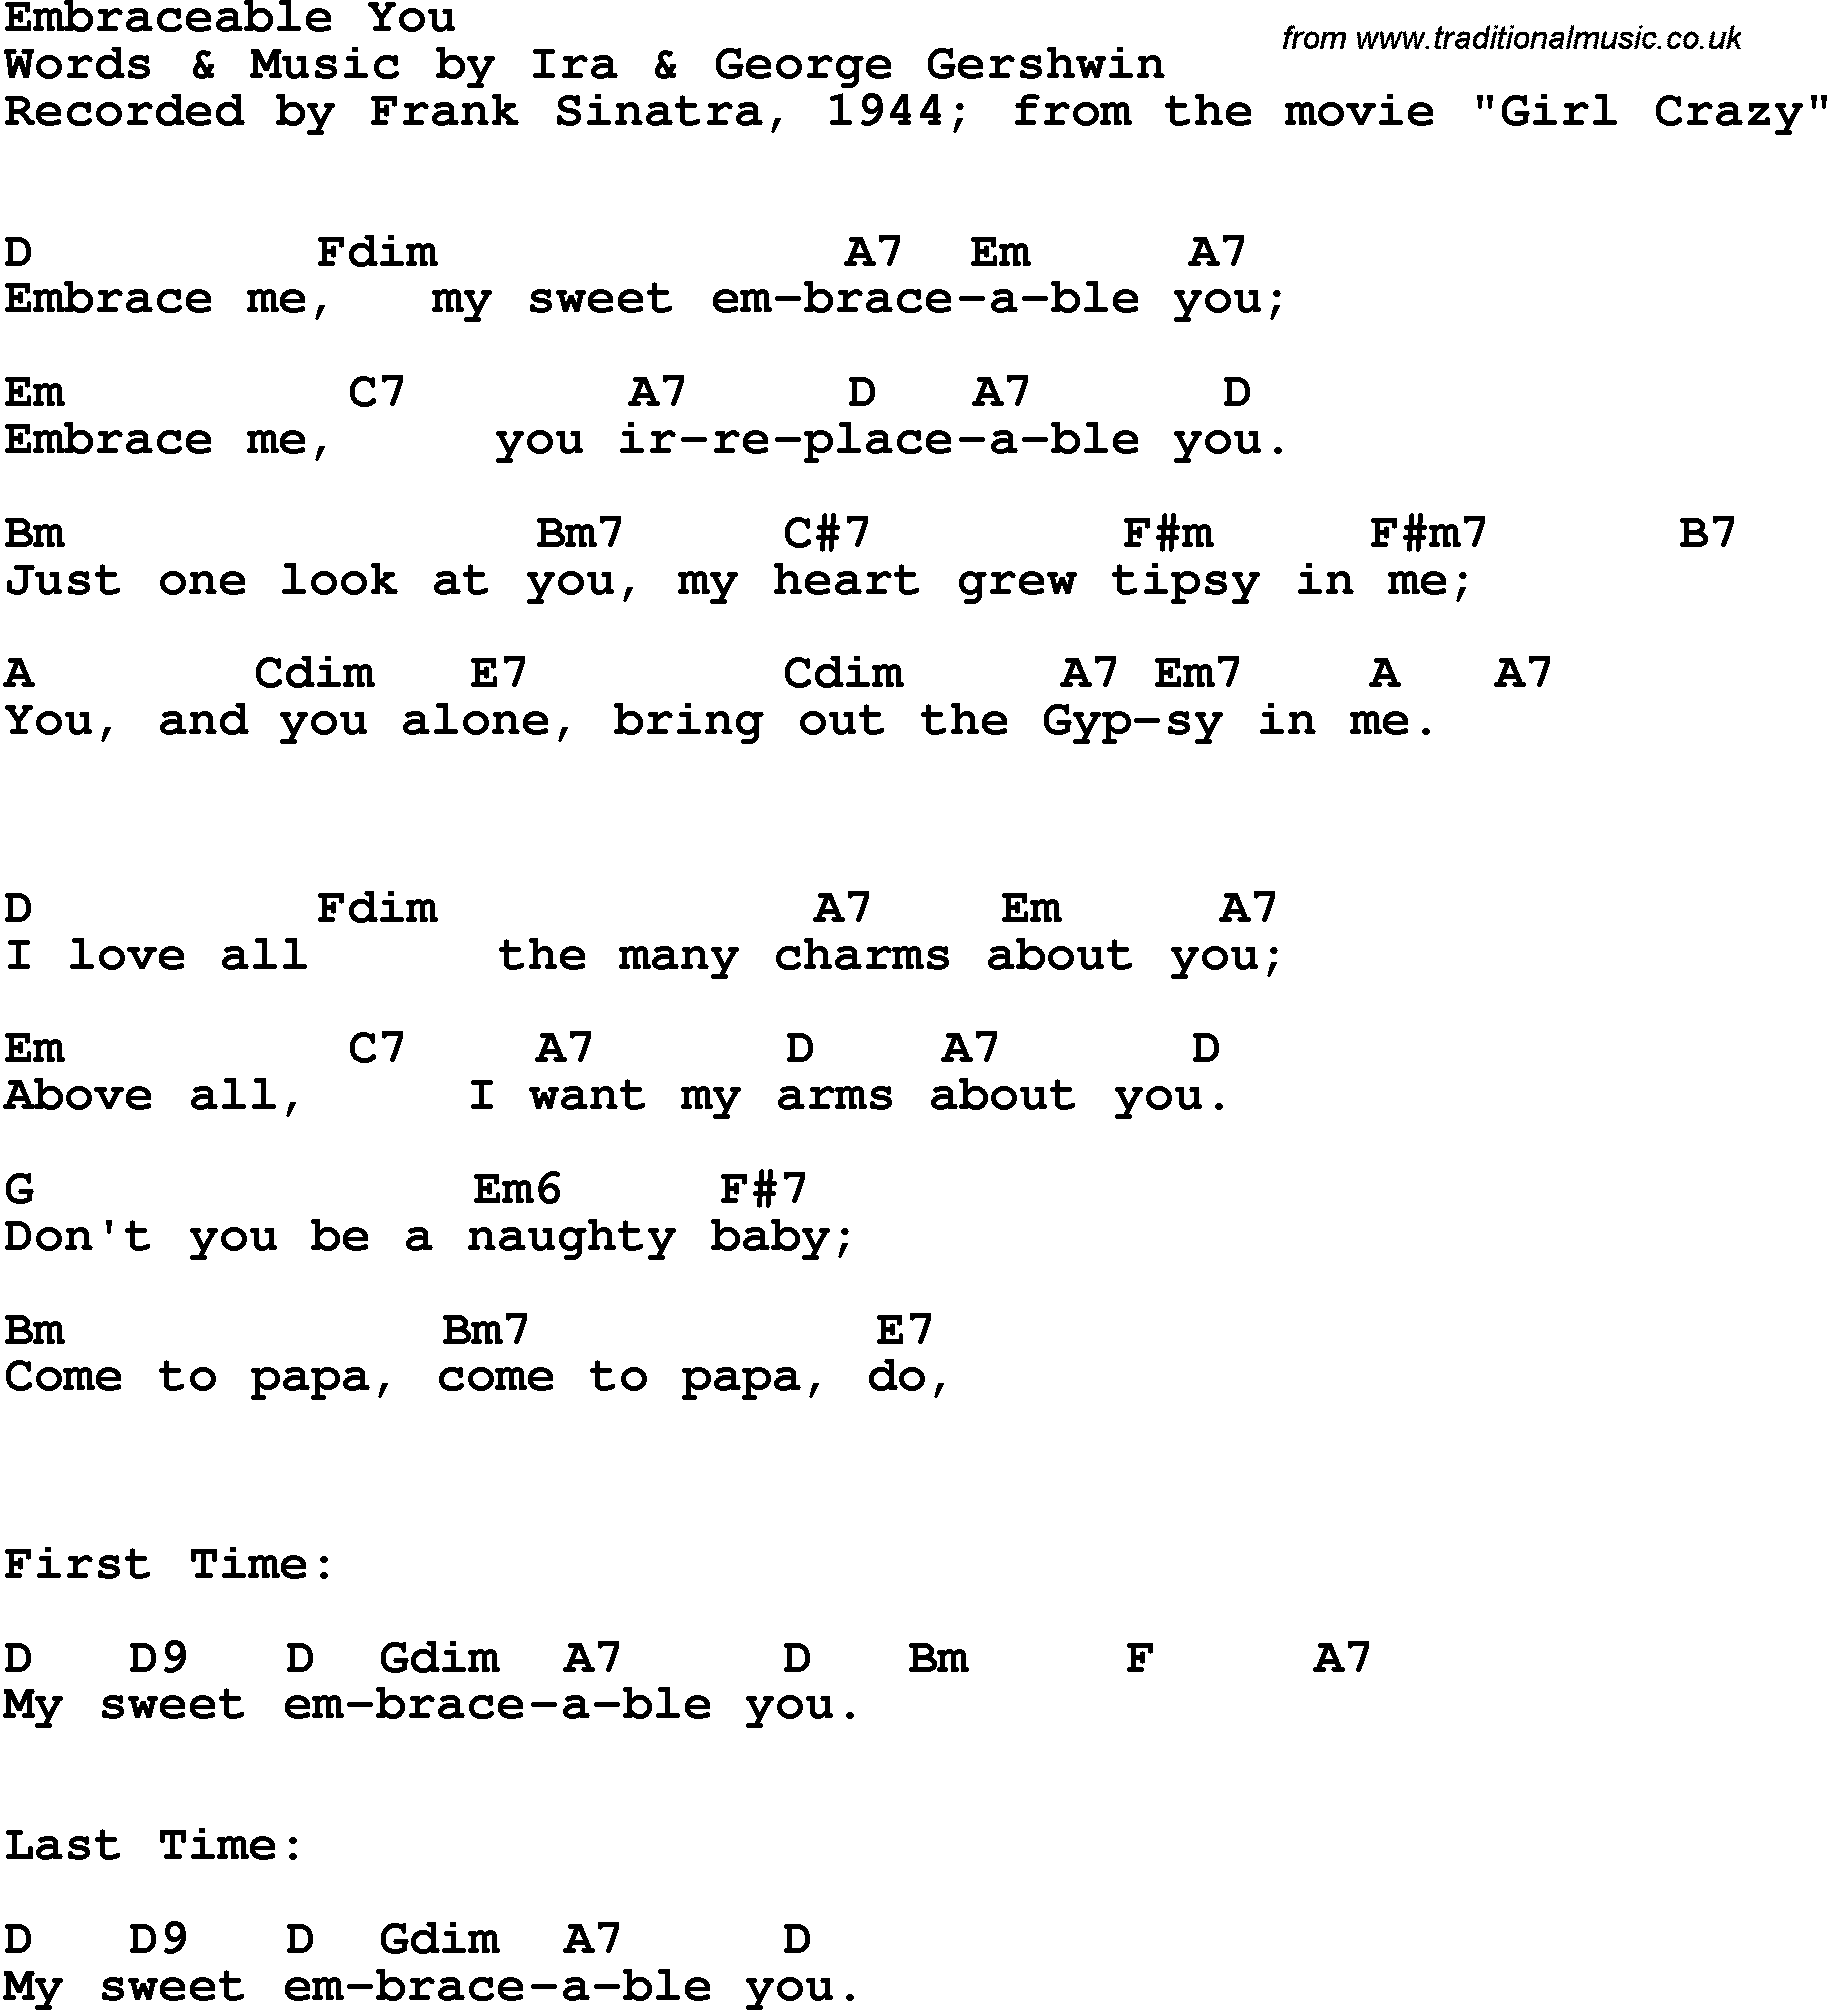 Song Lyrics with guitar chords for Embraceable You - Frank Sinatra, 1944